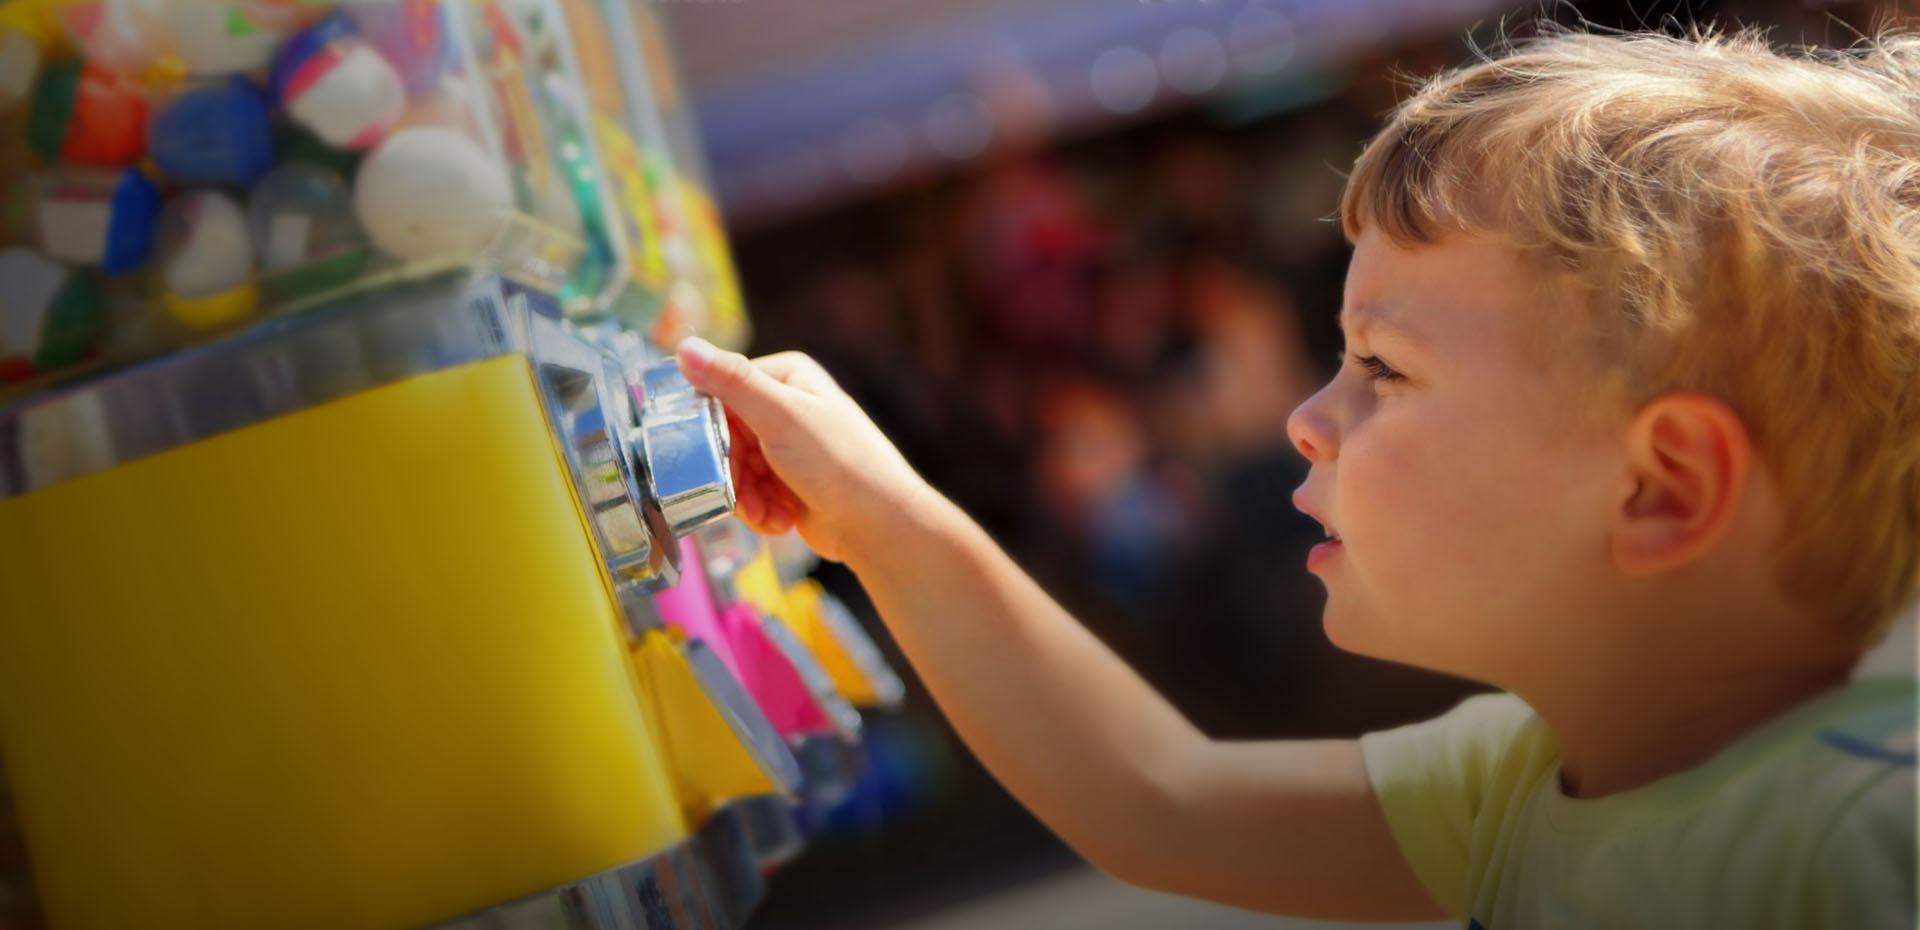 Installers Of Toys Vending Machines For Restaurants Peterborough